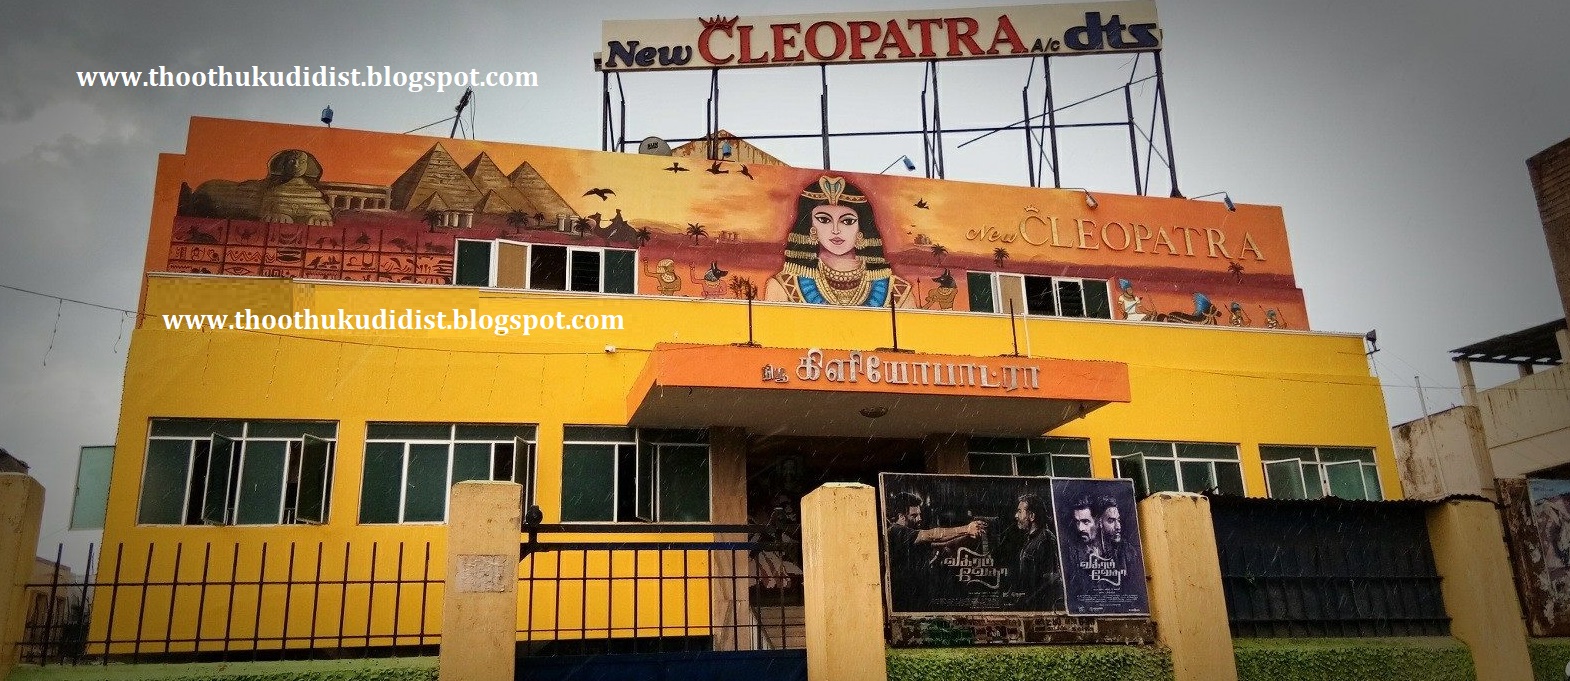 Cleopatra Theater - Thoothukudi - Complete Details